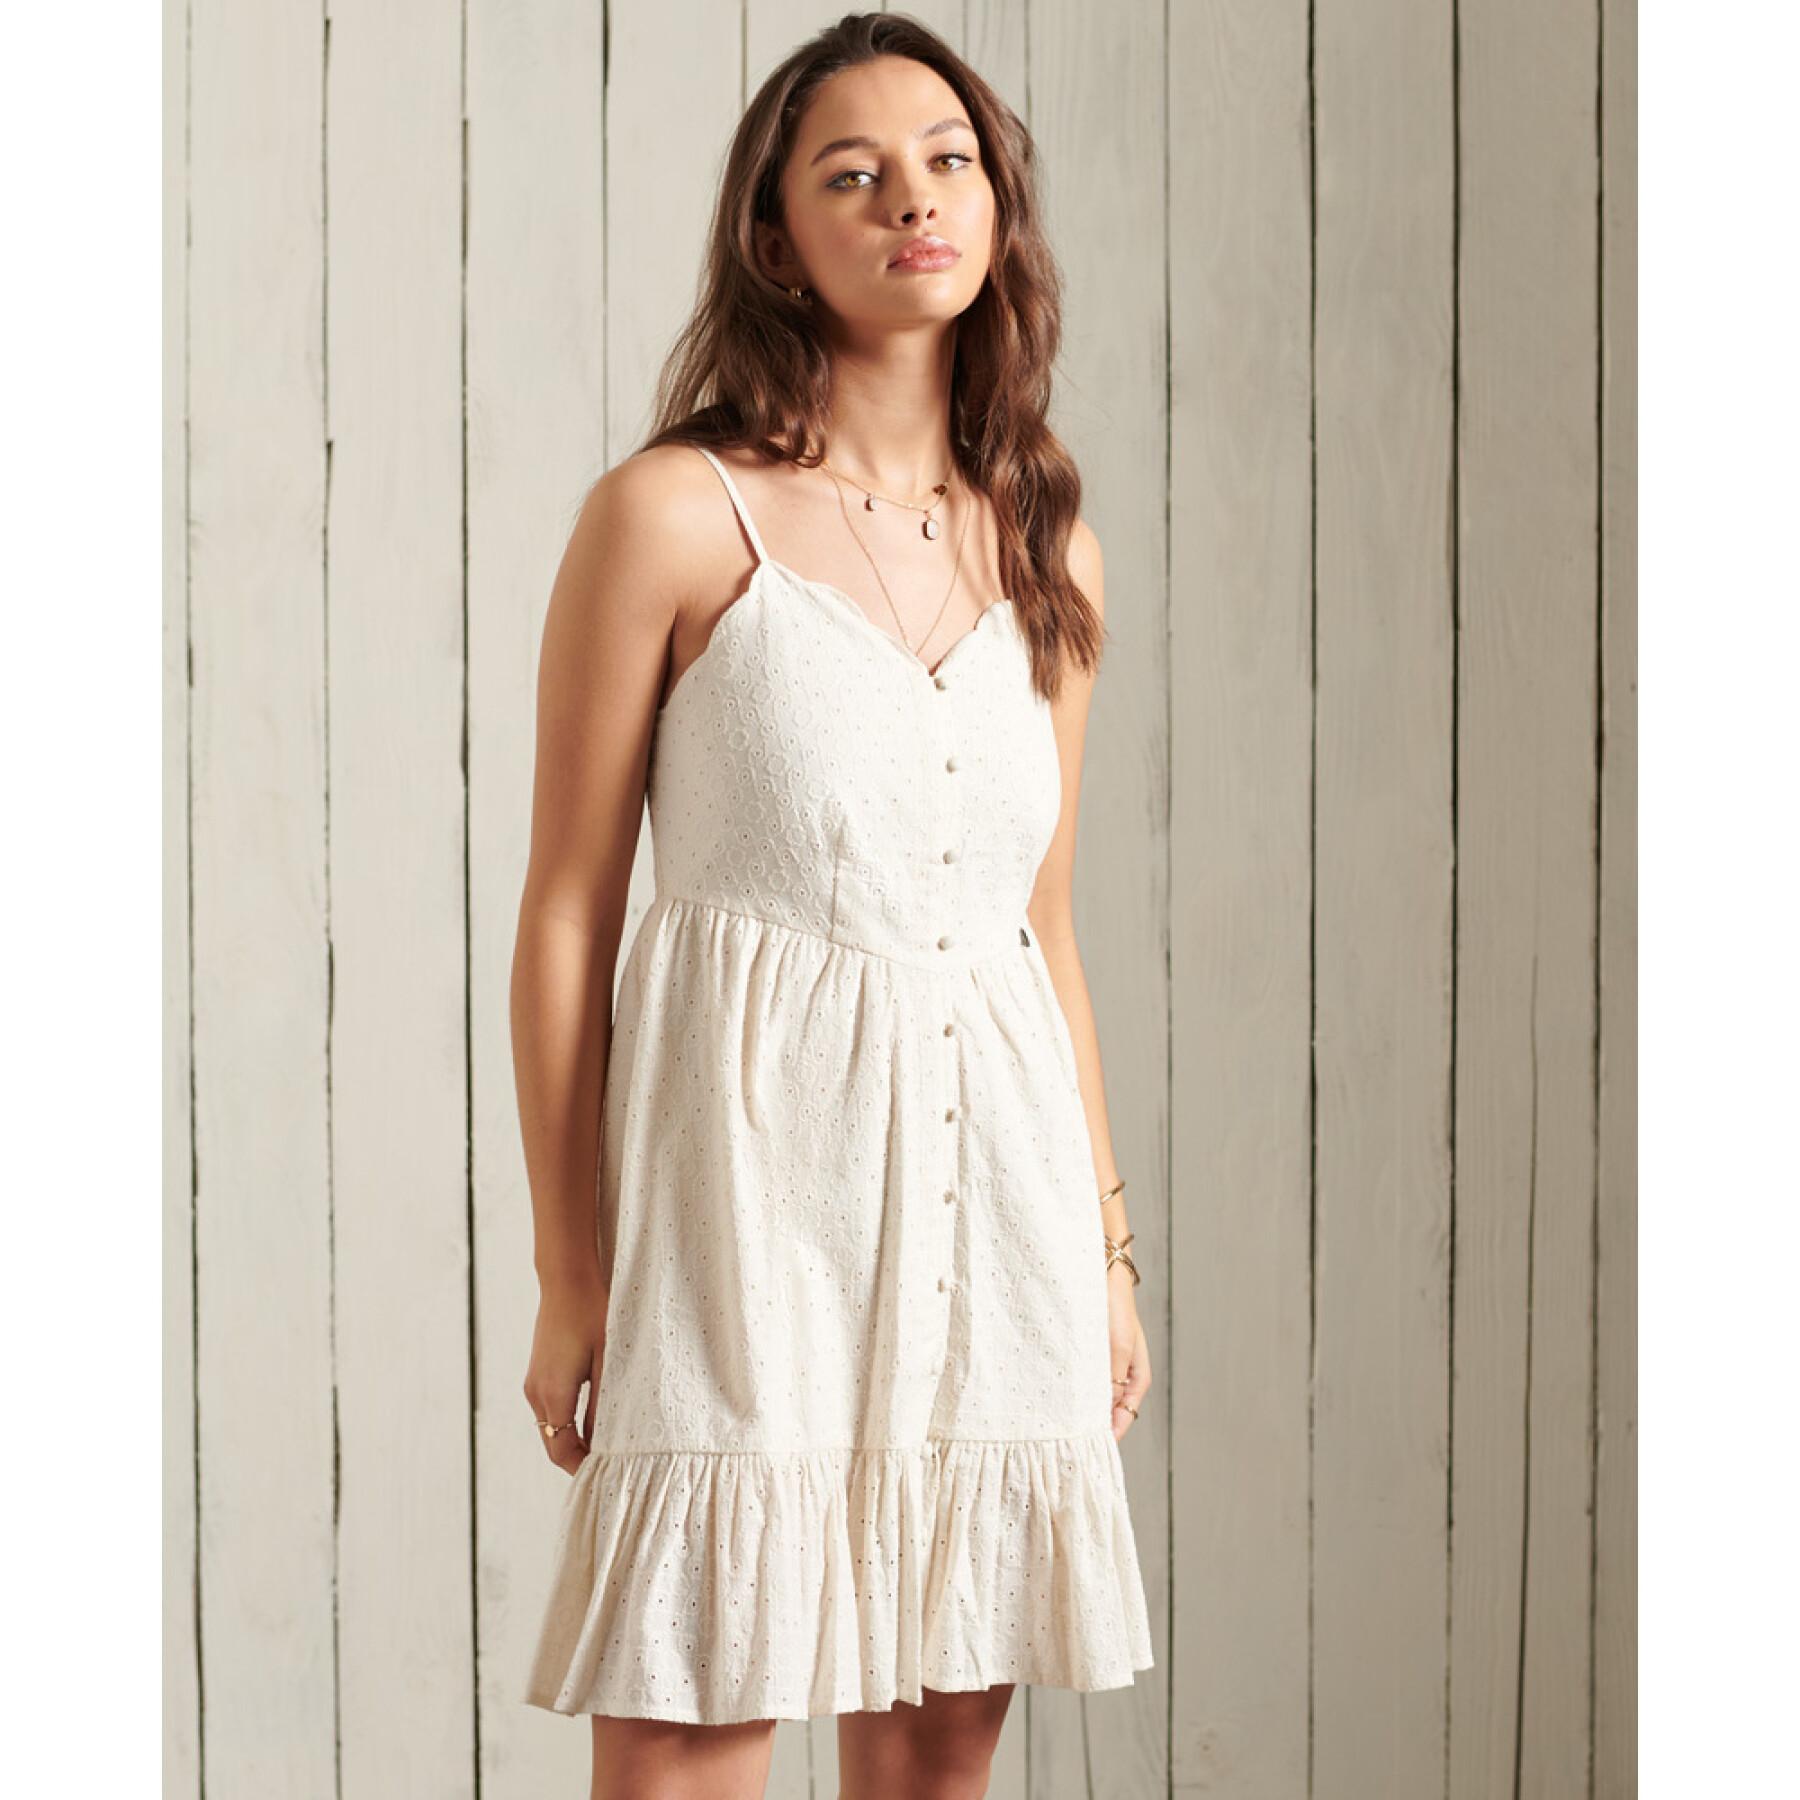 Women's embroidered dress Superdry